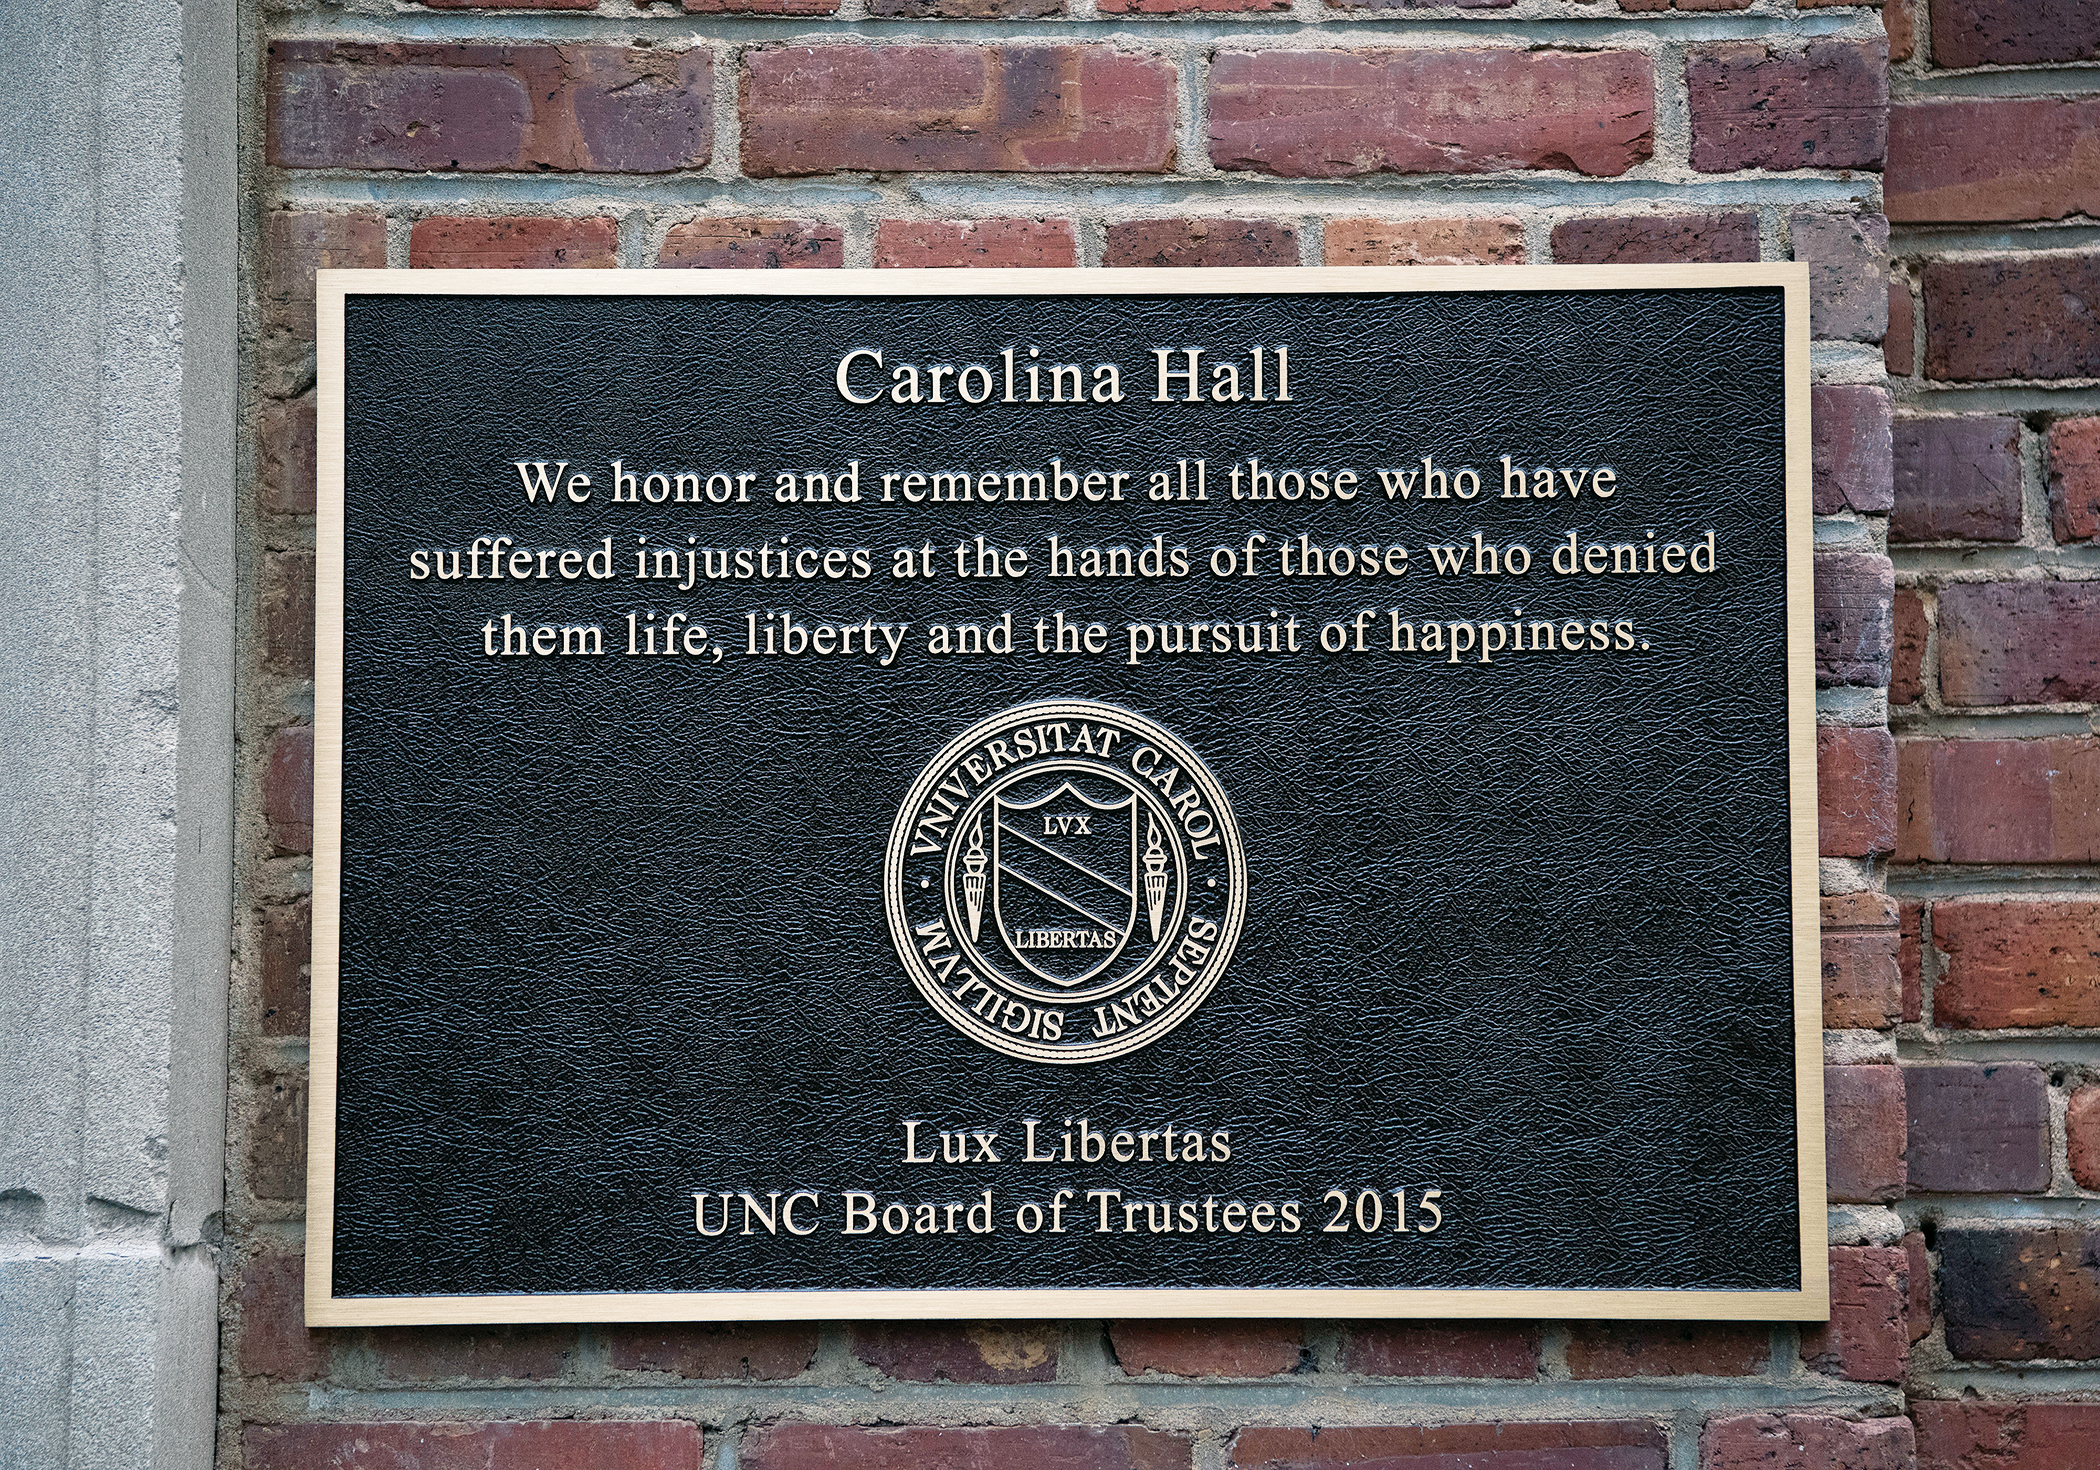 plaque on the building’s exterior